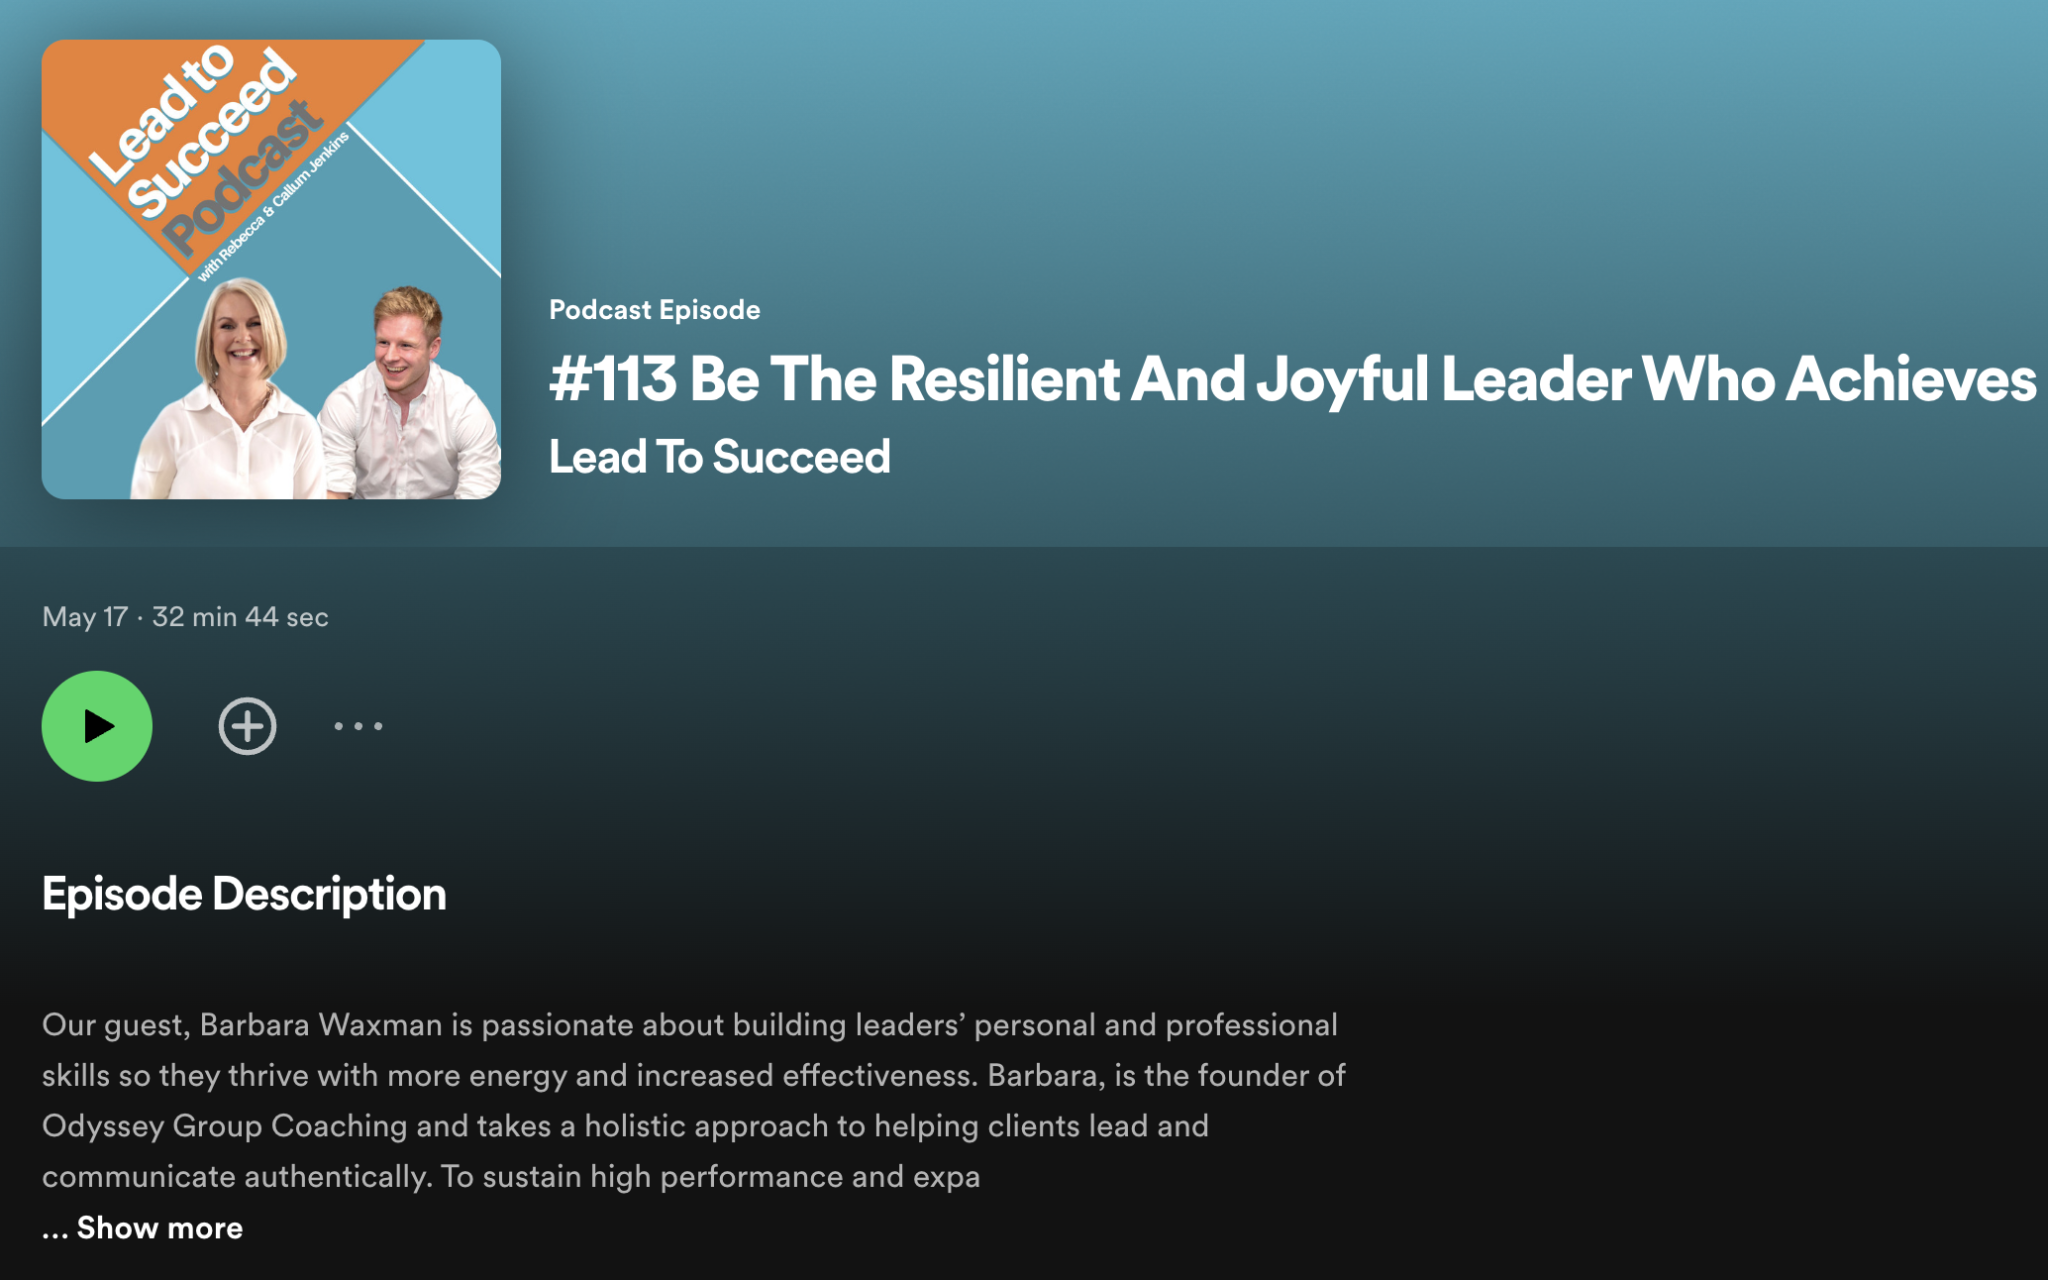 Lead to Succeed Podcast: Be the Resilient and Joyous Leader Who Achieves More in Less Time